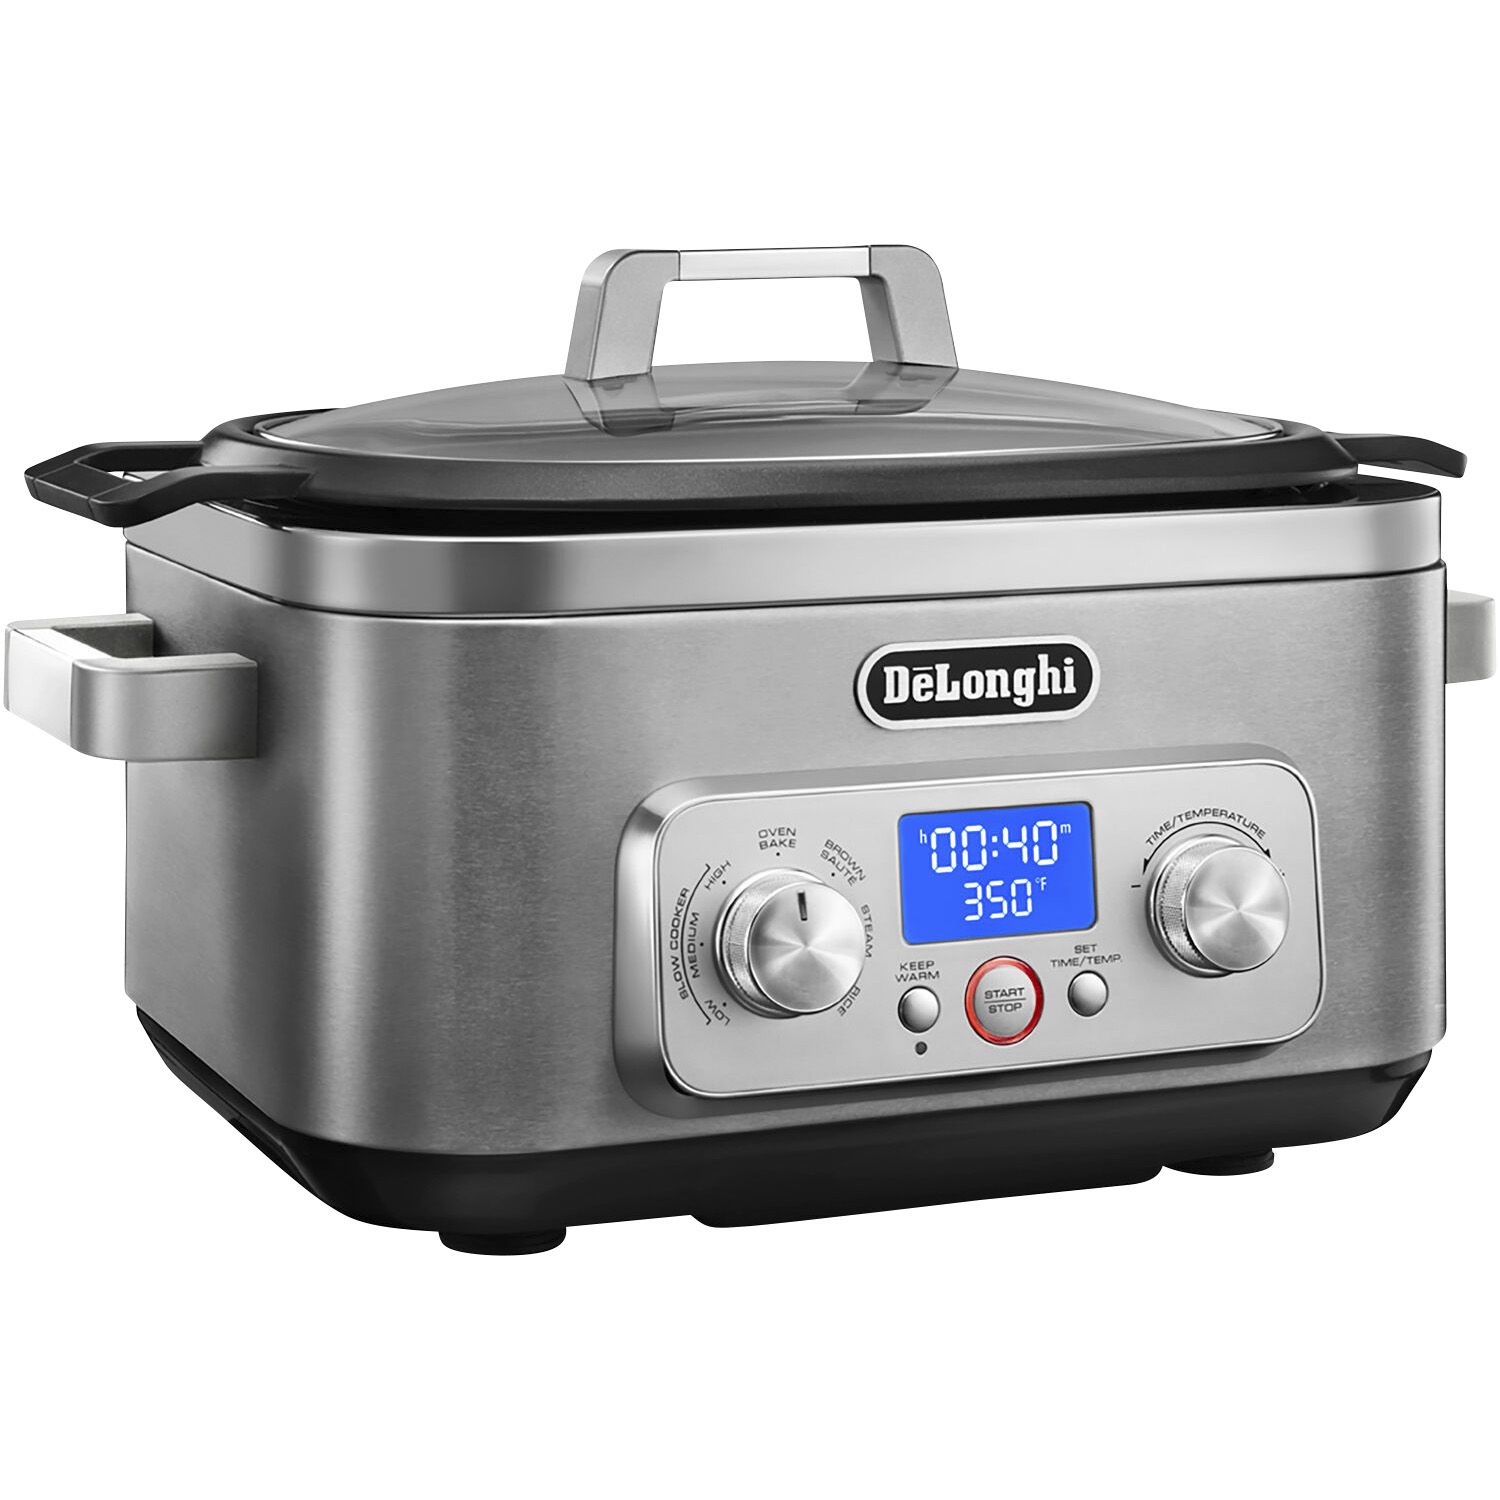 Versatile 8-in-1 Programmable Cooker for Delicious Meals